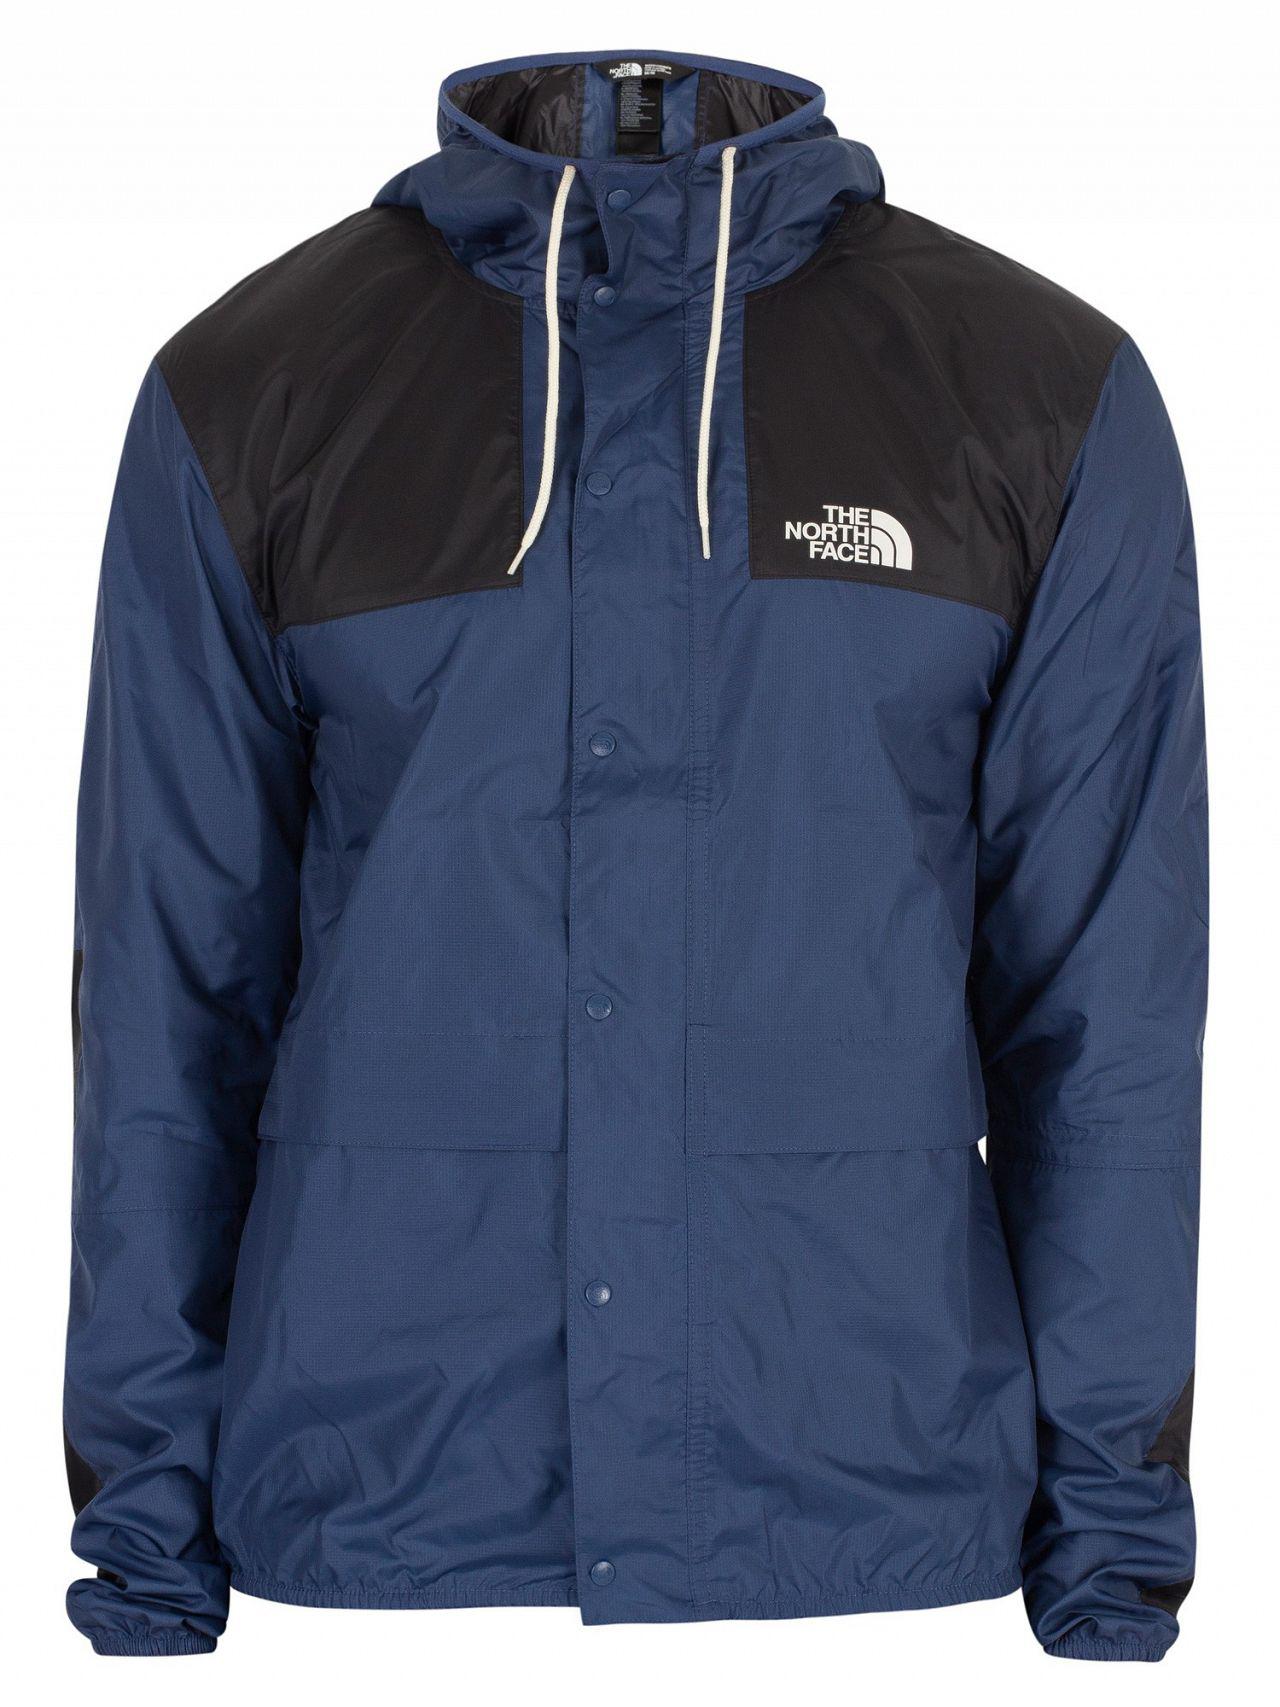 The North Face Synthetic Shady Blue 1985 Mountain Jacket for Men - Lyst